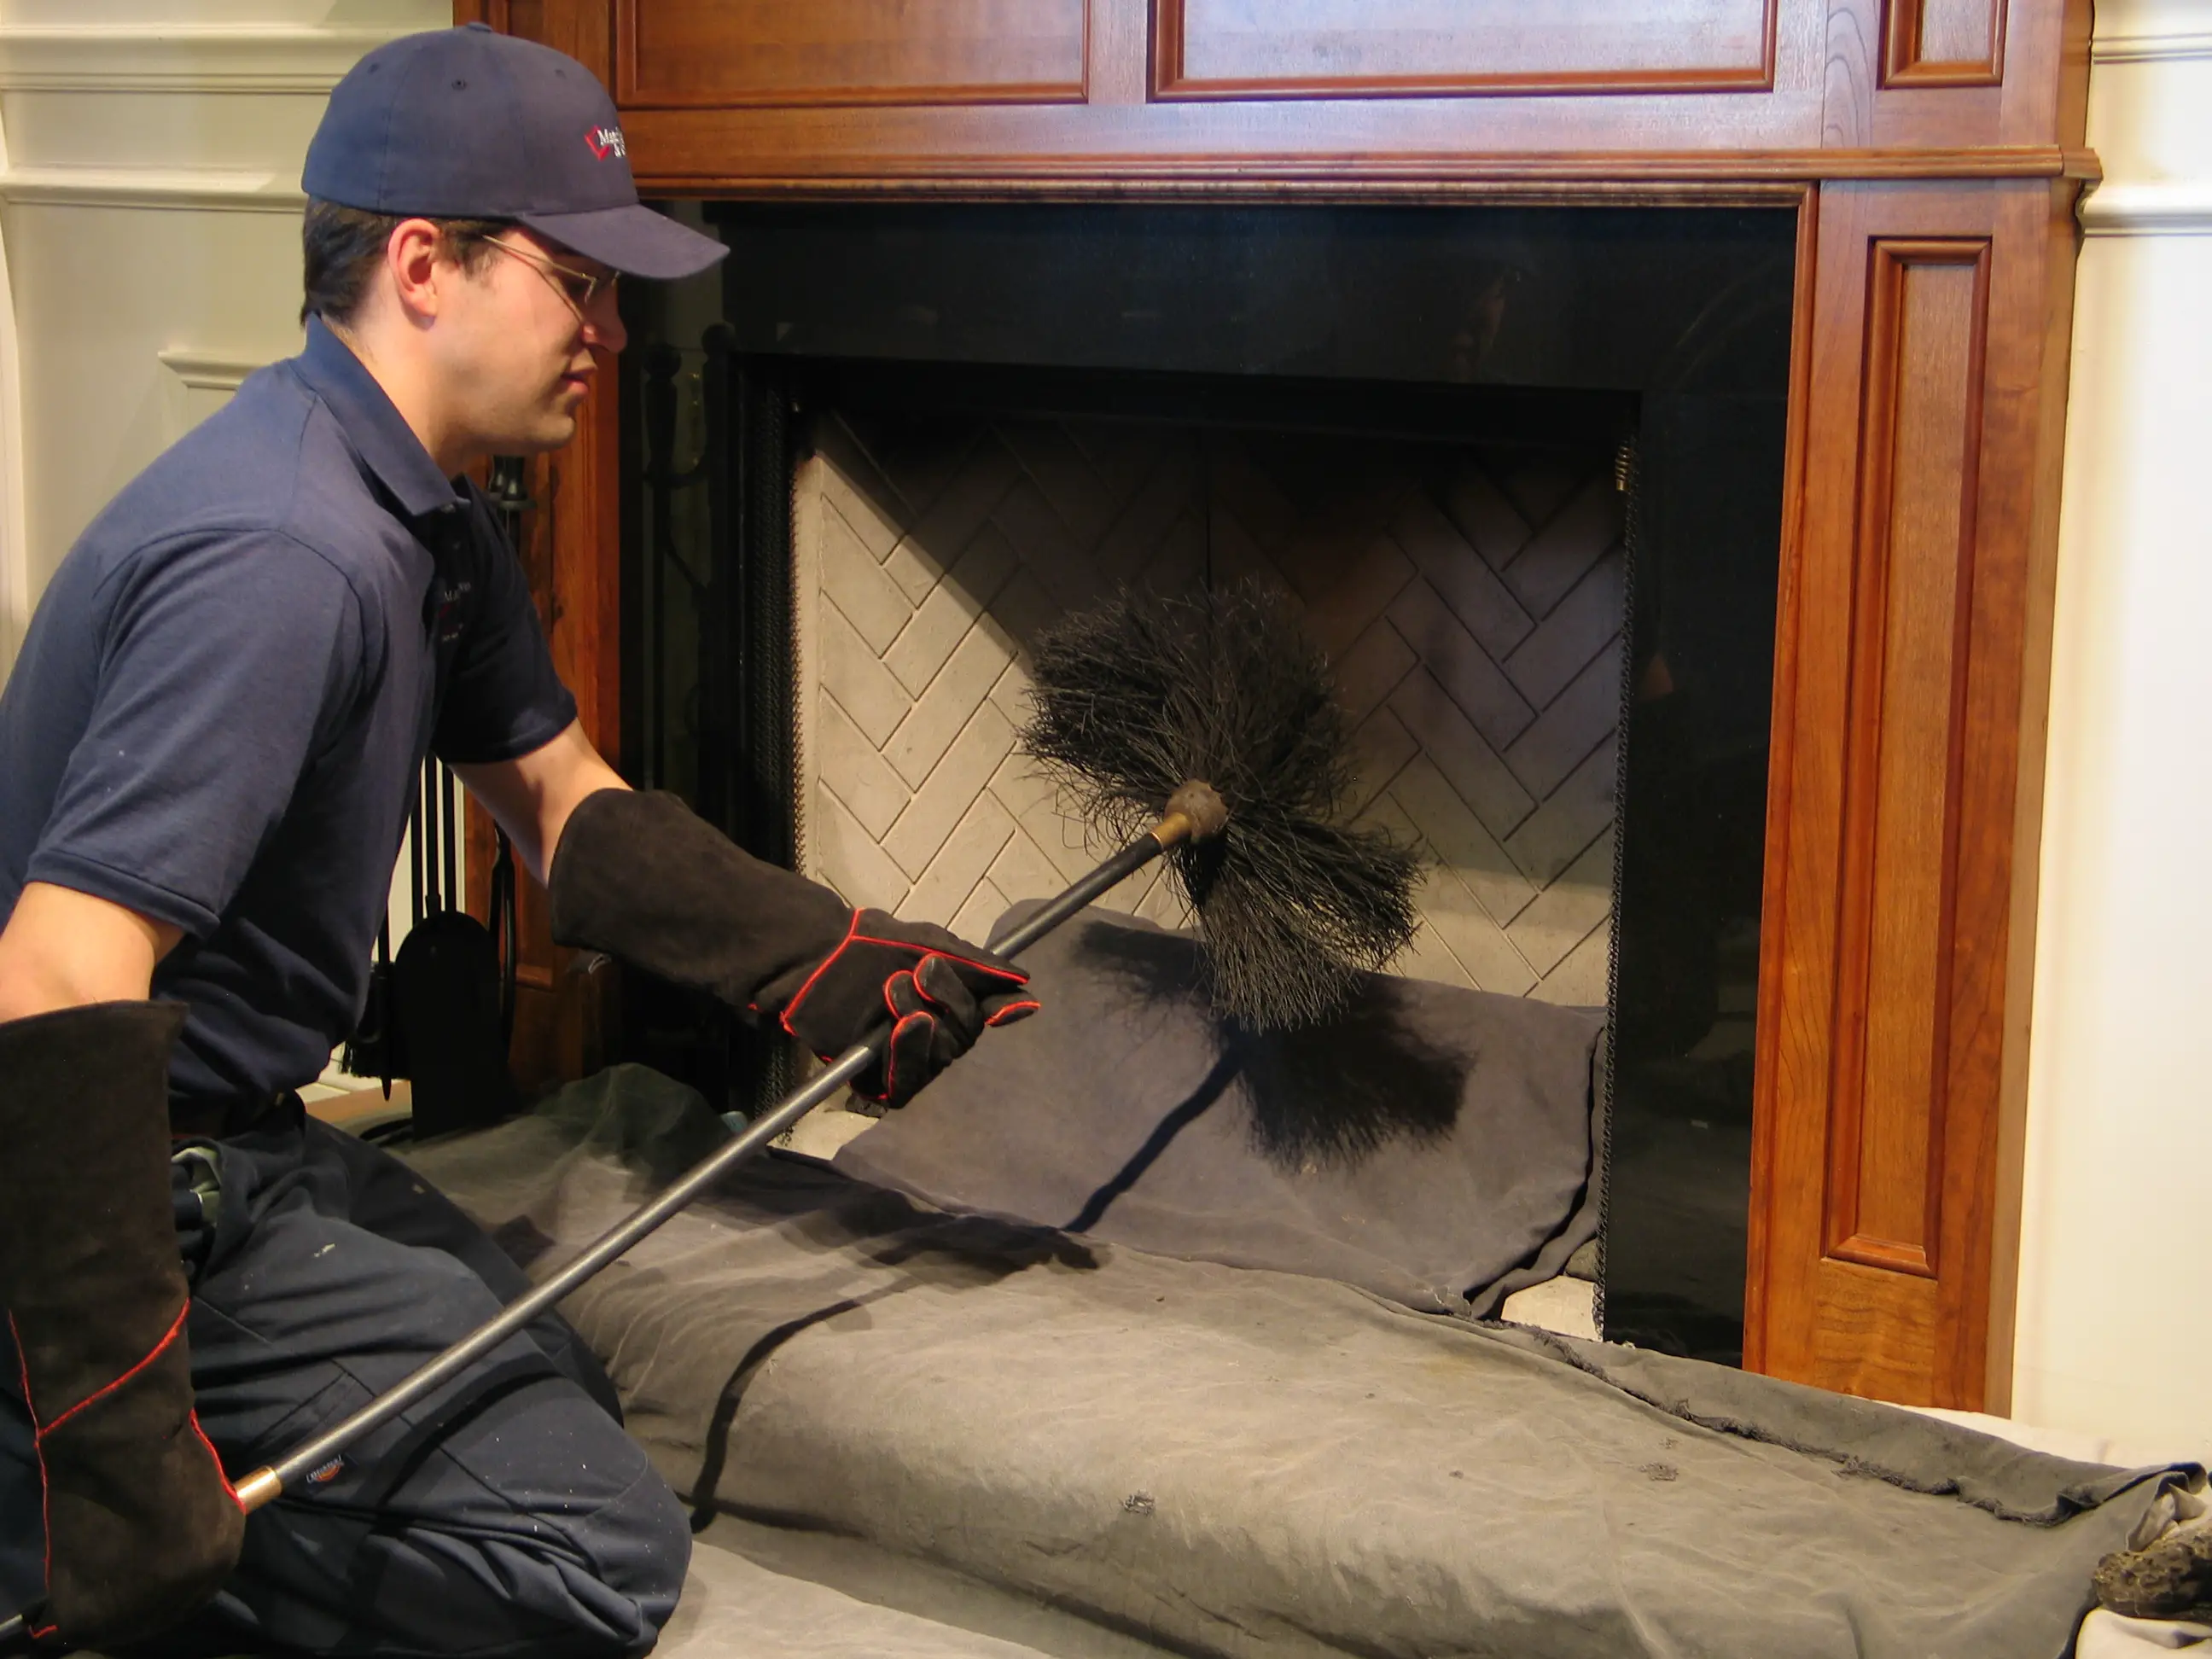 How to Clean Chimney & Fireplace? - Everything You Need to Know